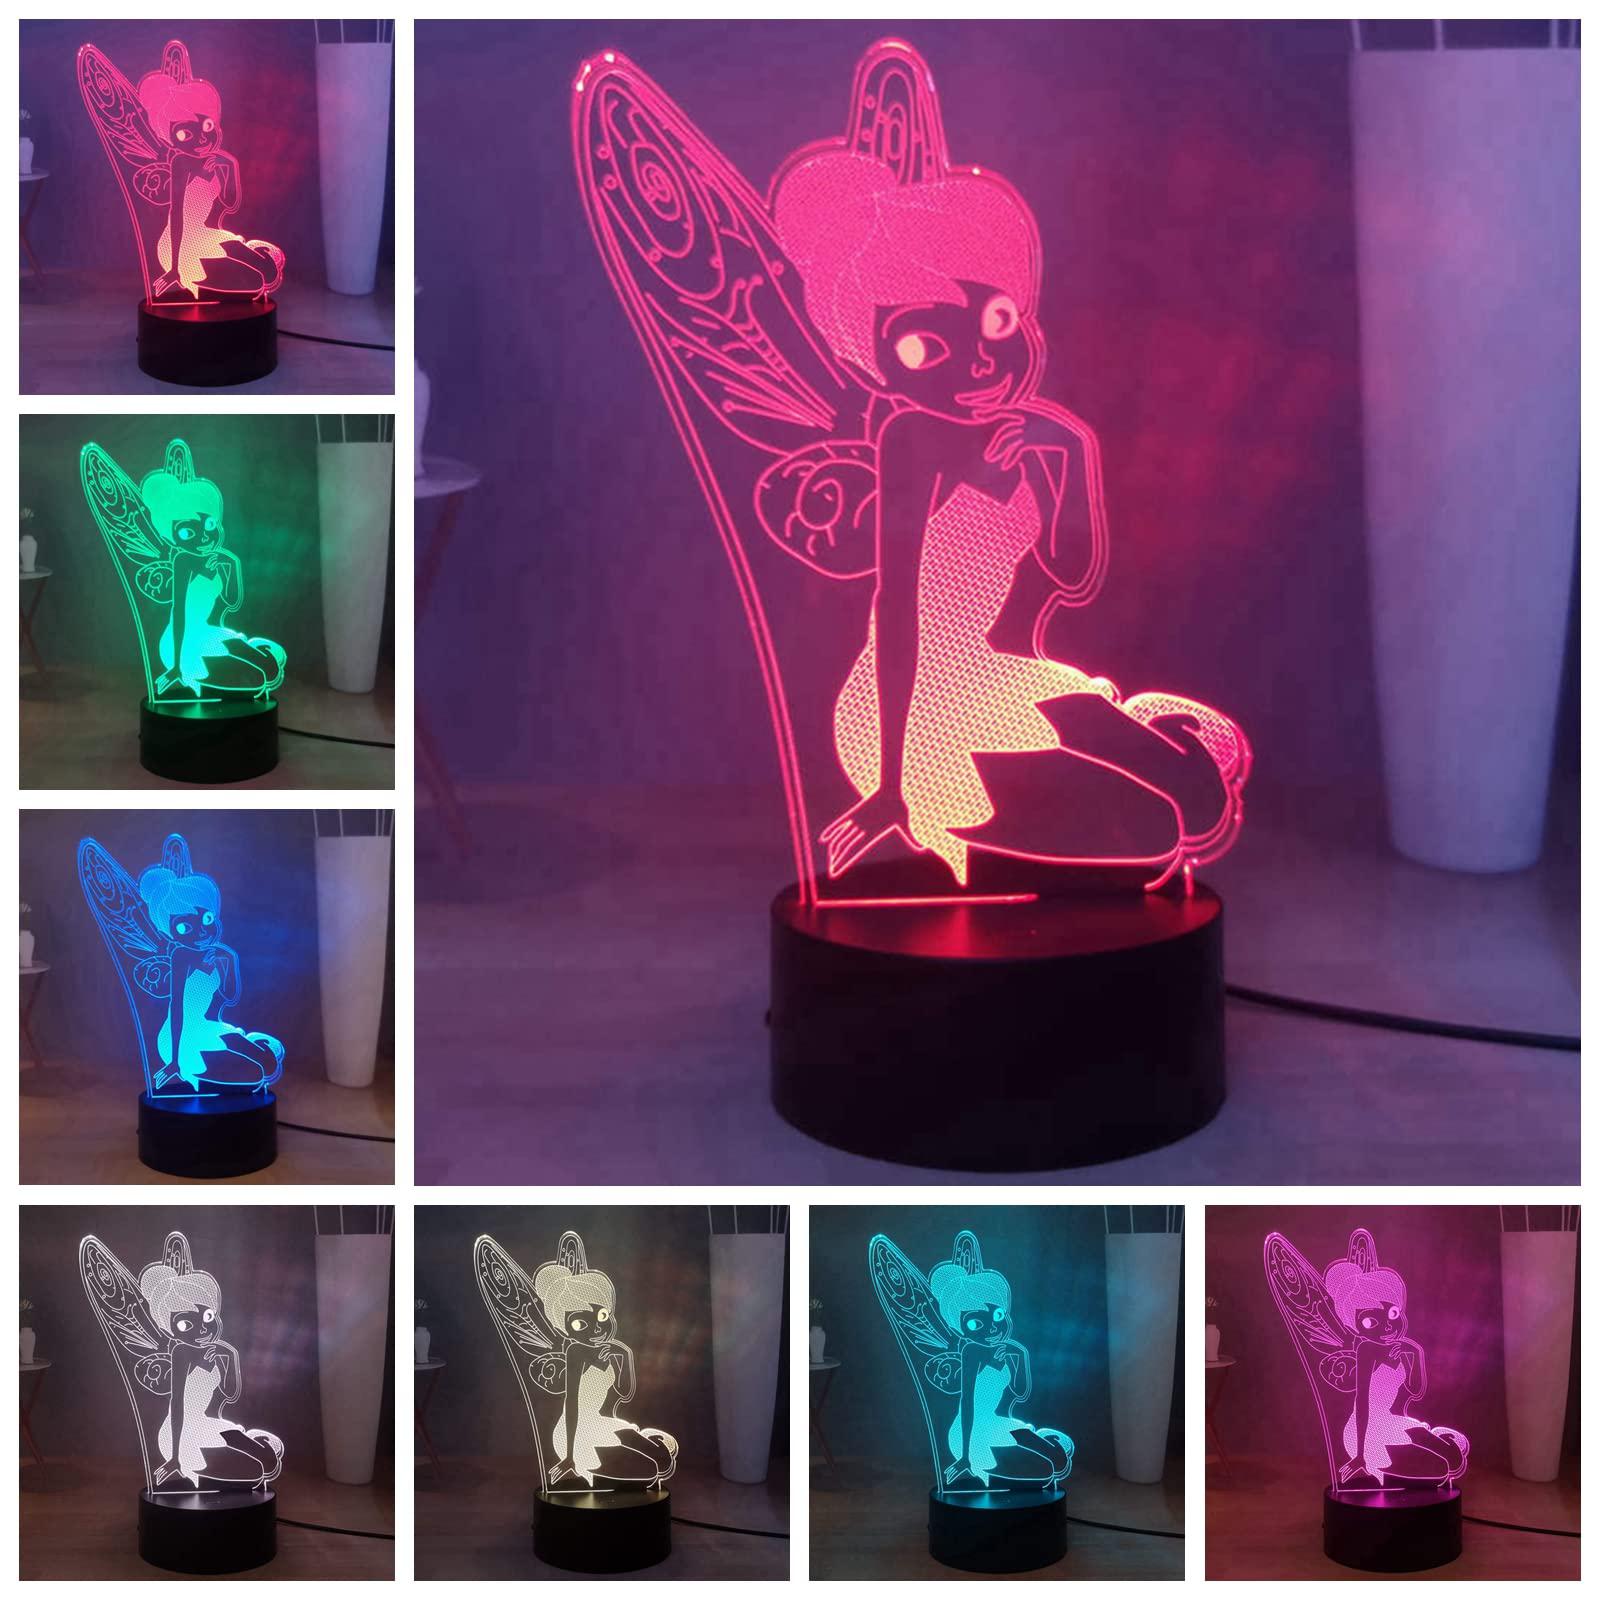 laysinly tinker bell 3d led night light, peter pan tinkerbell 7 color desk lamp, usb touch bedside lamp, remote bedroom lamps